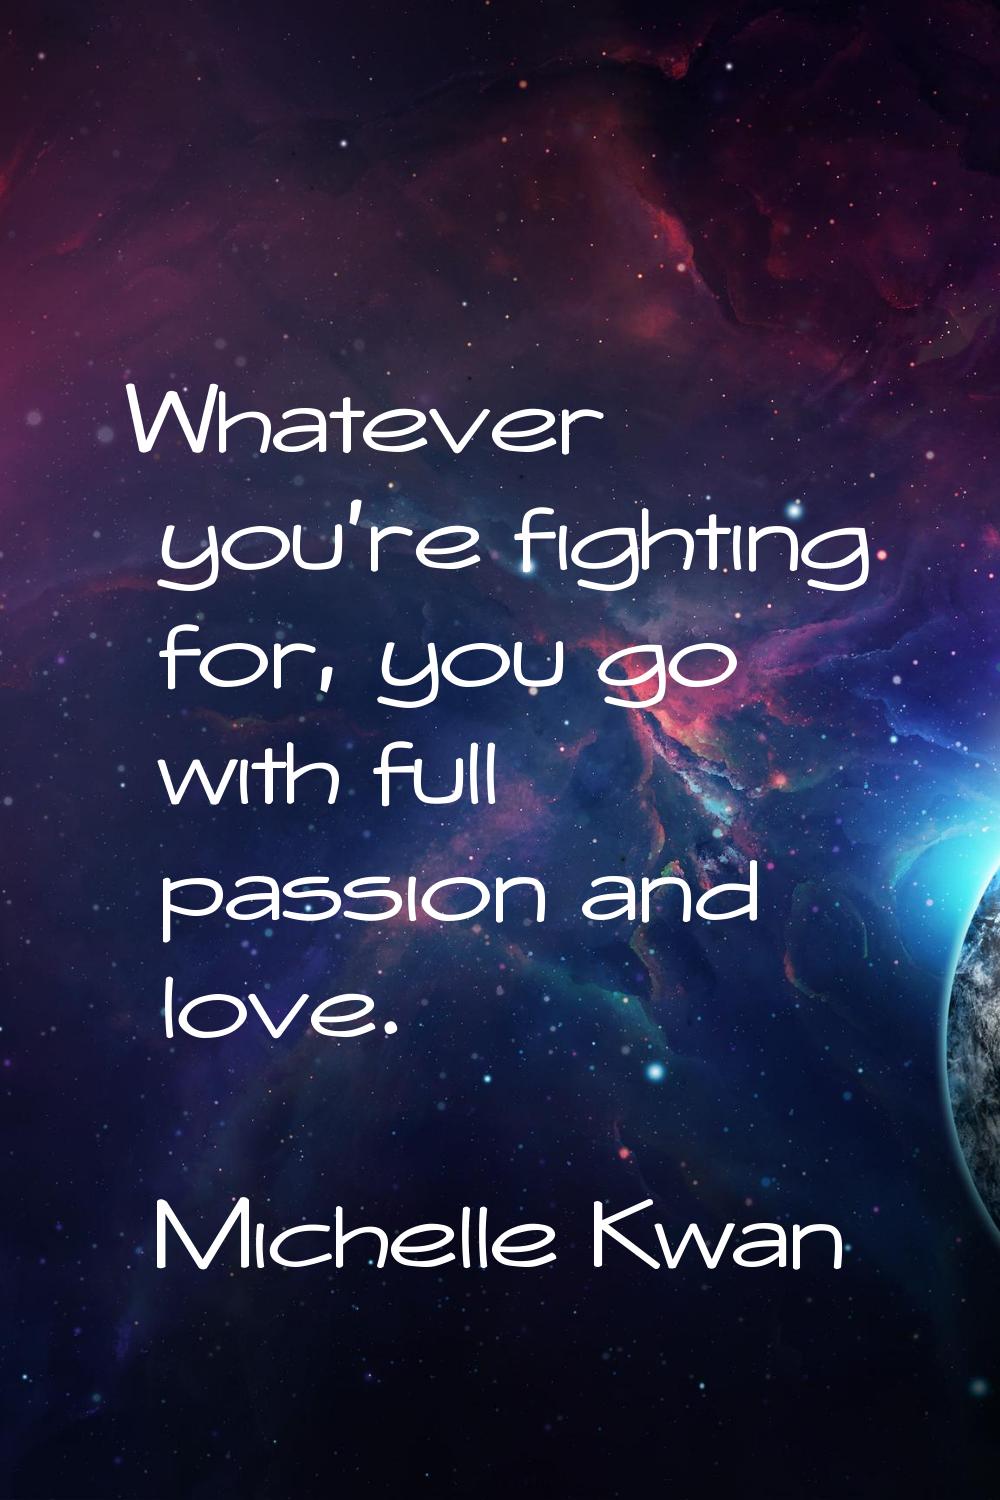 Whatever you're fighting for, you go with full passion and love.